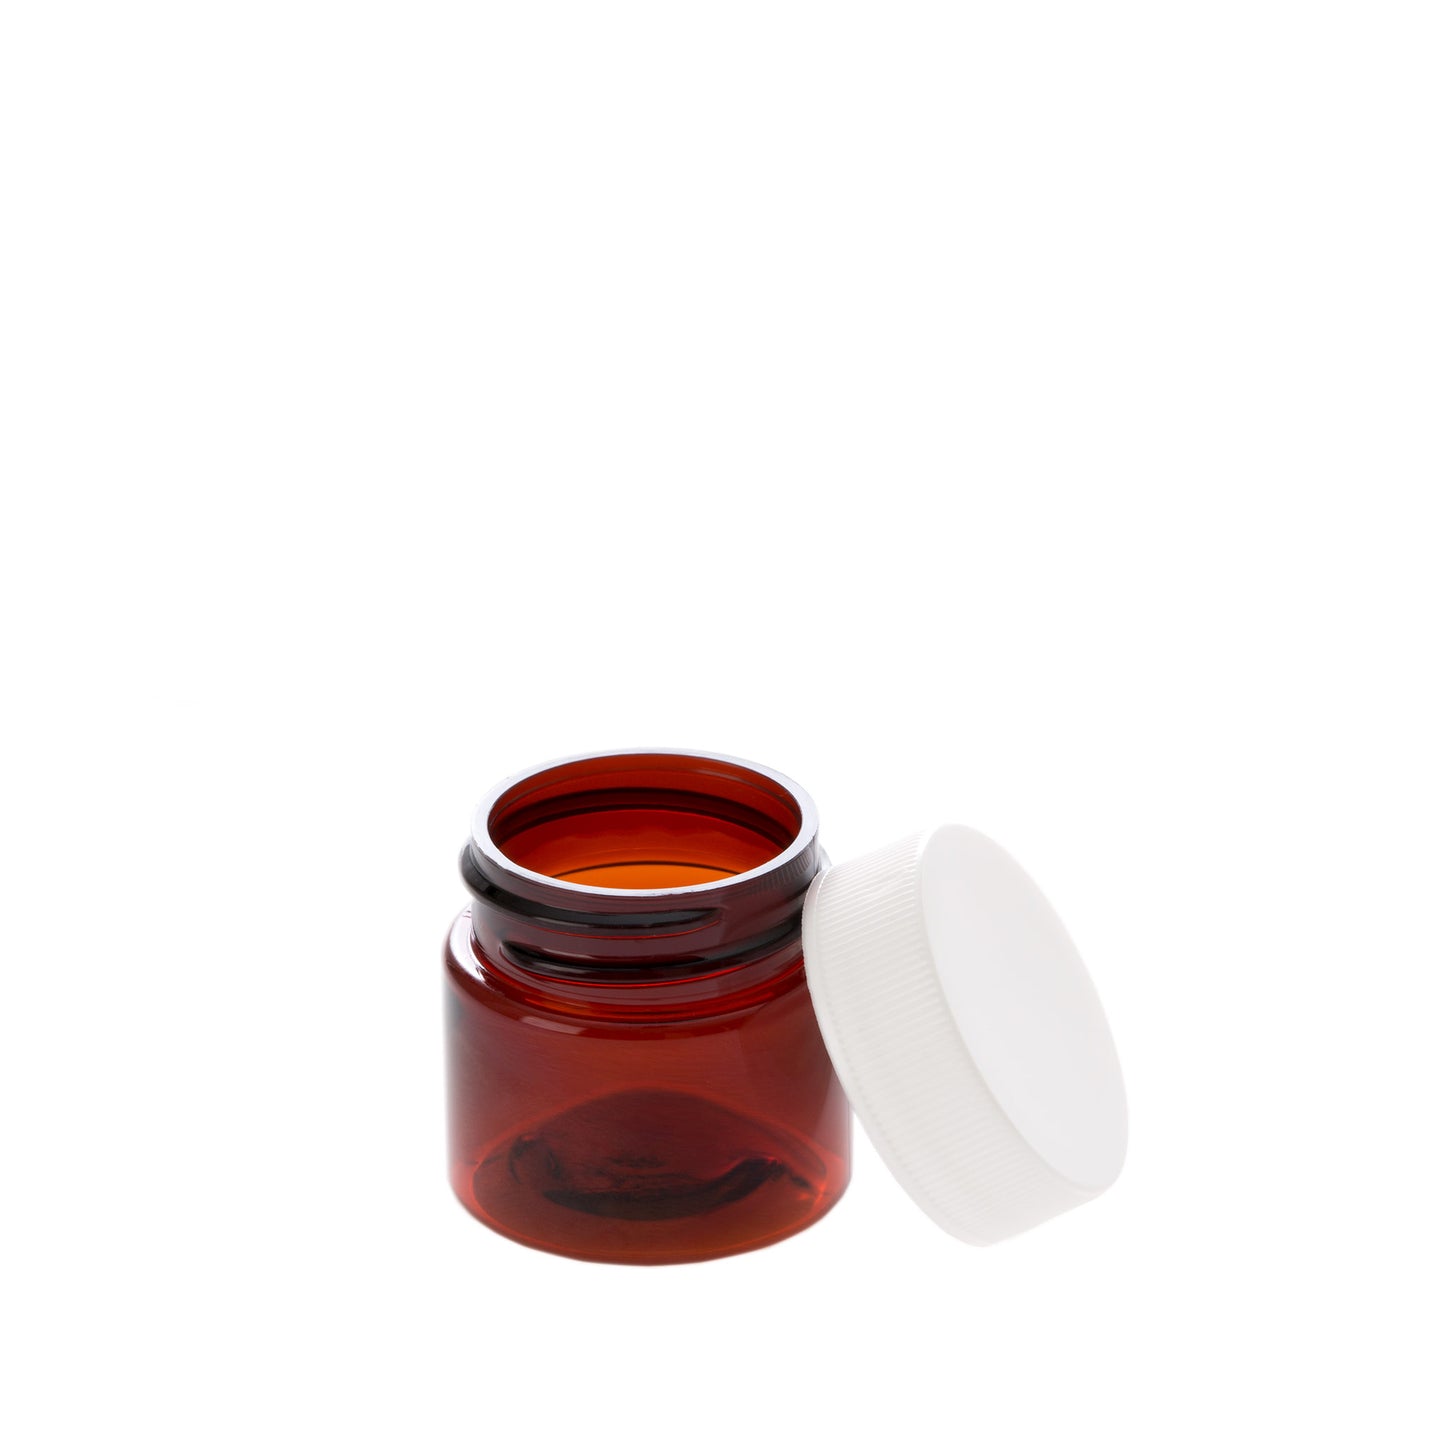 0.5 oz Straight Sided Amber Jar with White Ribbed Screw Cap